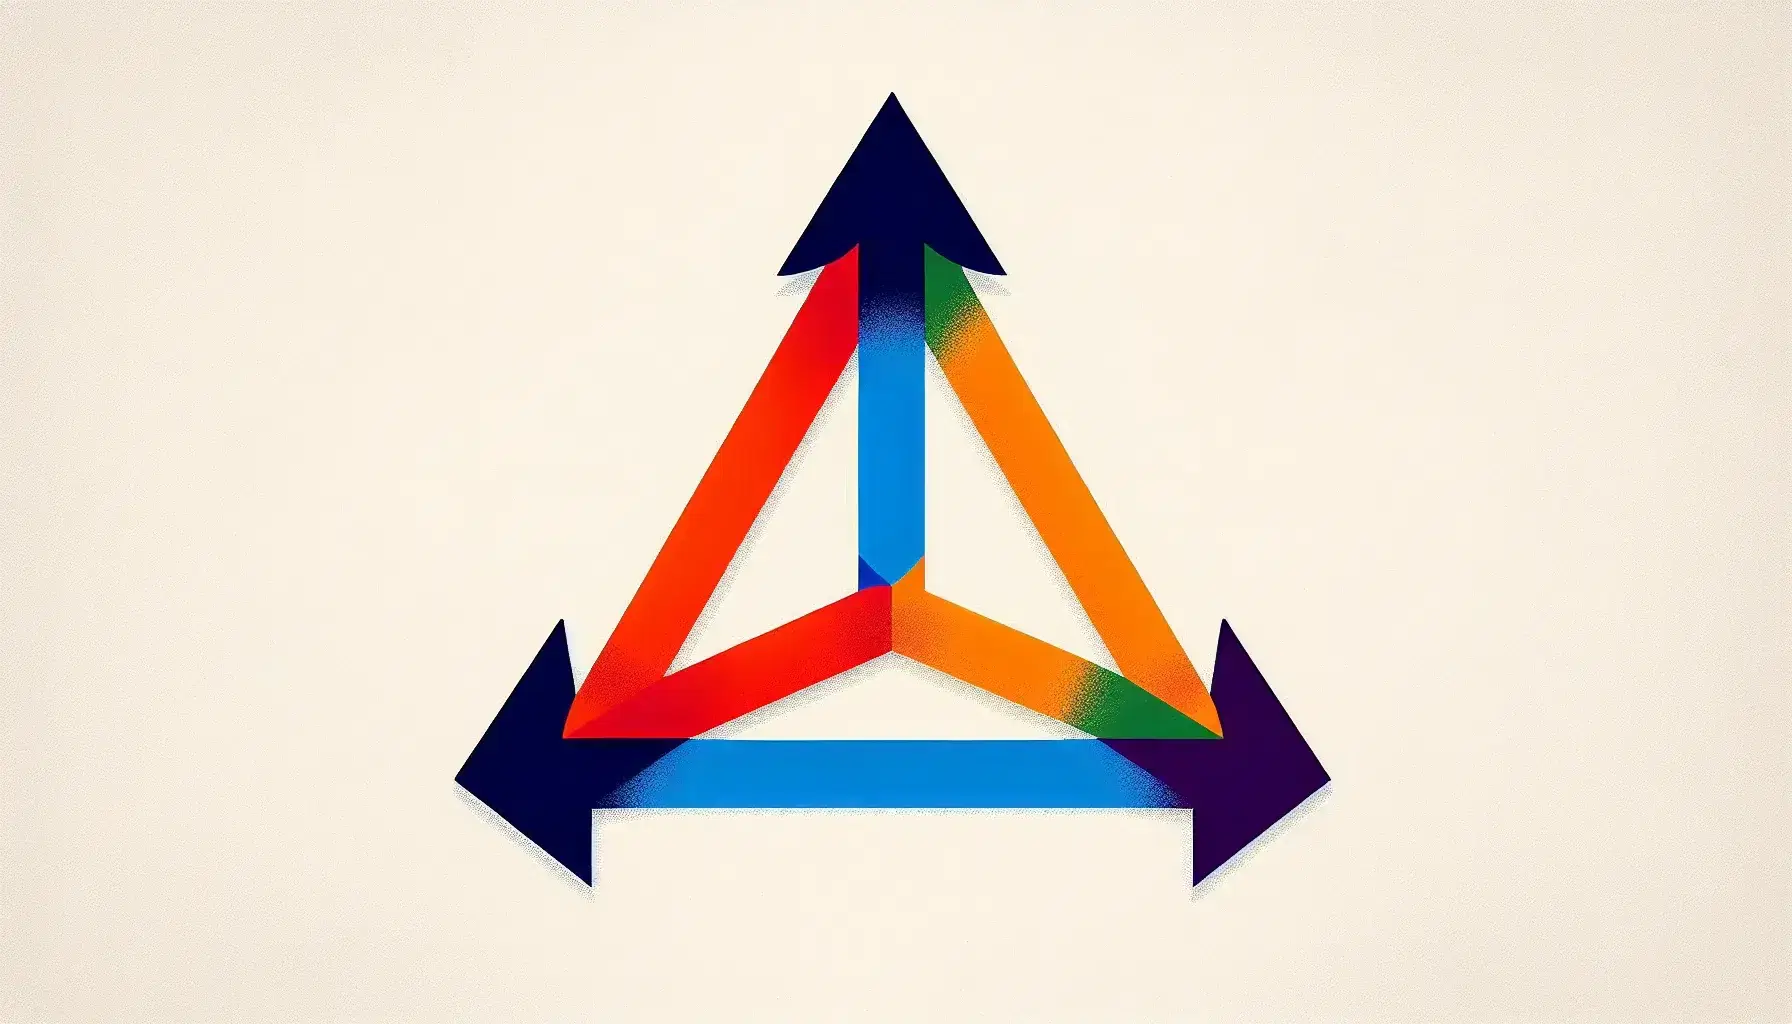 Colorful arrows in two sets on a white background, with a red, blue, and green triangle formation and an overlapping orange and purple pair with a resultant yellow arrow.